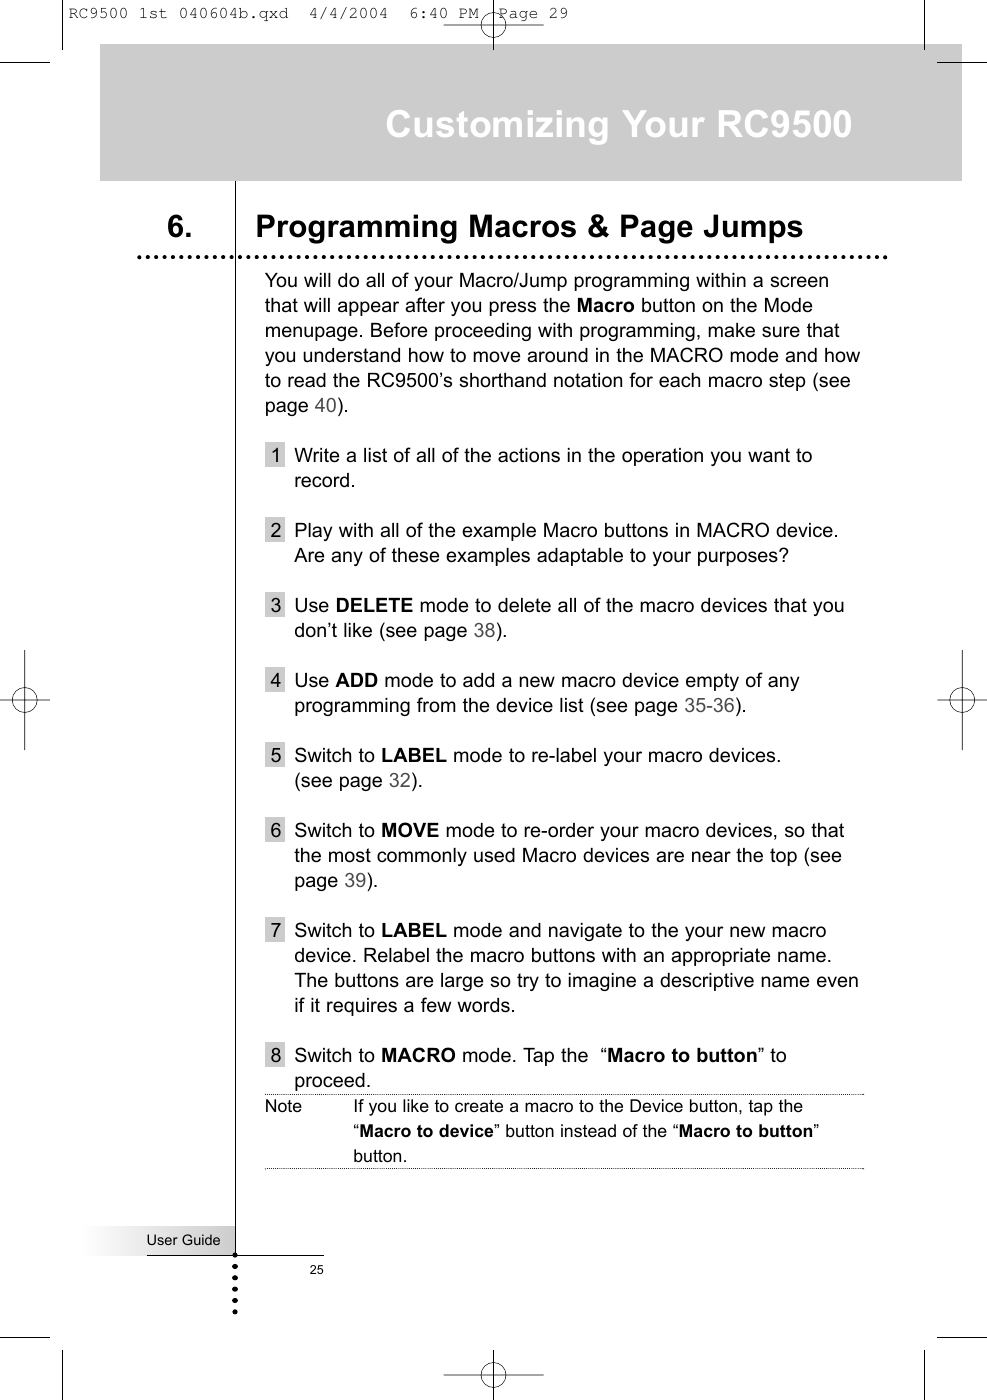 User Guide25You will do all of your Macro/Jump programming within a screenthat will appear after you press the Macro button on the Modemenupage. Before proceeding with programming, make sure thatyou understand how to move around in the MACRO mode and howto read the RC9500’s shorthand notation for each macro step (seepage 40).1 Write a list of all of the actions in the operation you want torecord.2 Play with all of the example Macro buttons in MACRO device.Are any of these examples adaptable to your purposes?  3 Use DELETE mode to delete all of the macro devices that youdon’t like (see page 38).4 Use ADD mode to add a new macro device empty of anyprogramming from the device list (see page 35-36).5 Switch to LABEL mode to re-label your macro devices. (see page 32).6 Switch to MOVE mode to re-order your macro devices, so thatthe most commonly used Macro devices are near the top (seepage 39).7 Switch to LABEL mode and navigate to the your new macrodevice. Relabel the macro buttons with an appropriate name.The buttons are large so try to imagine a descriptive name evenif it requires a few words.8 Switch to MACRO mode. Tap the  “Macro to button” toproceed.Note If you like to create a macro to the Device button, tap the“Macro to device” button instead of the “Macro to button”button.Customizing Your RC95006. Programming Macros &amp; Page JumpsRC9500 1st 040604b.qxd  4/4/2004  6:40 PM  Page 29